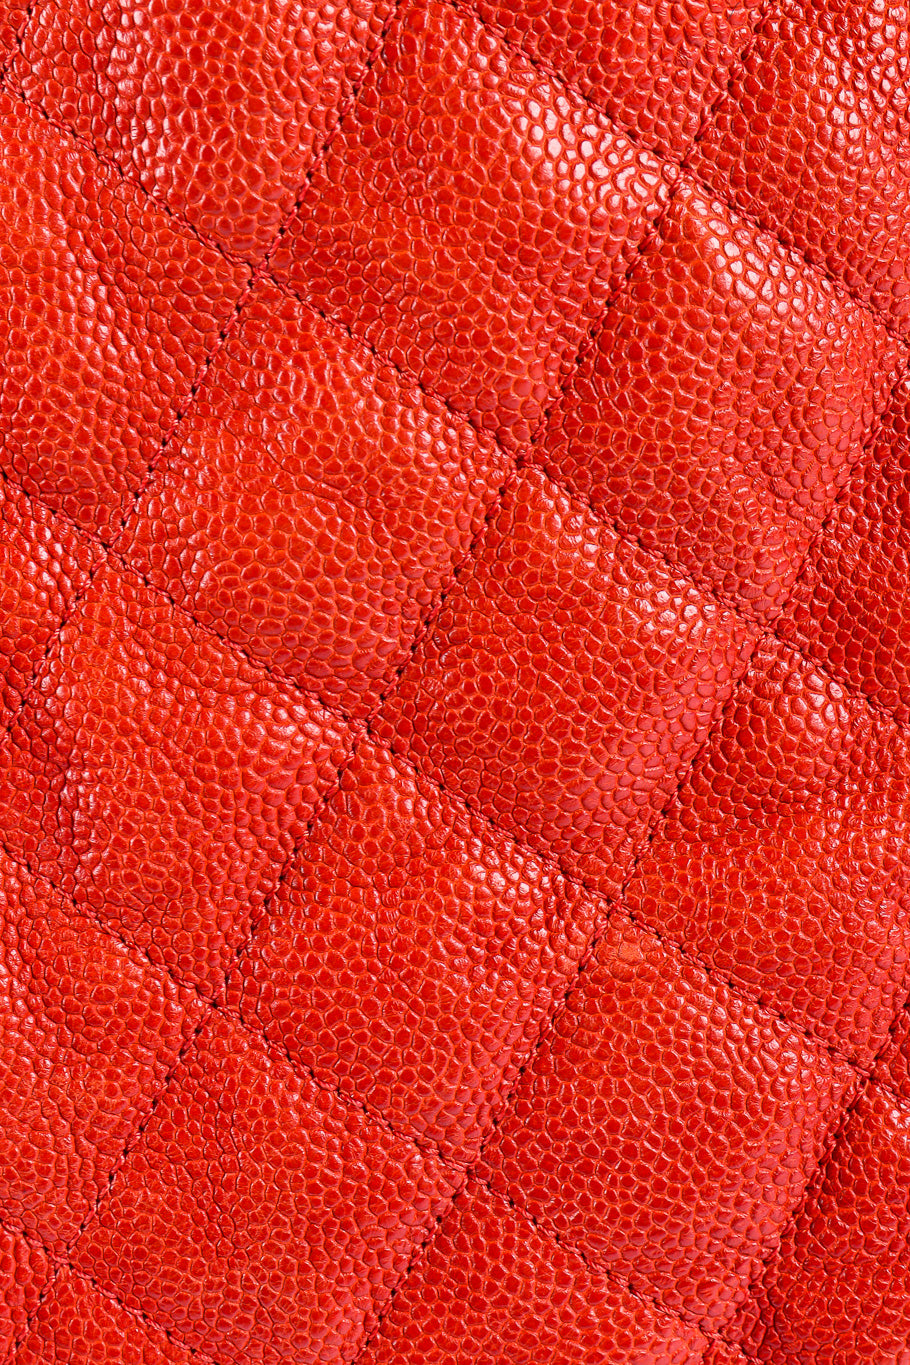 French riviera quilted hobo bag fabric details @recessla